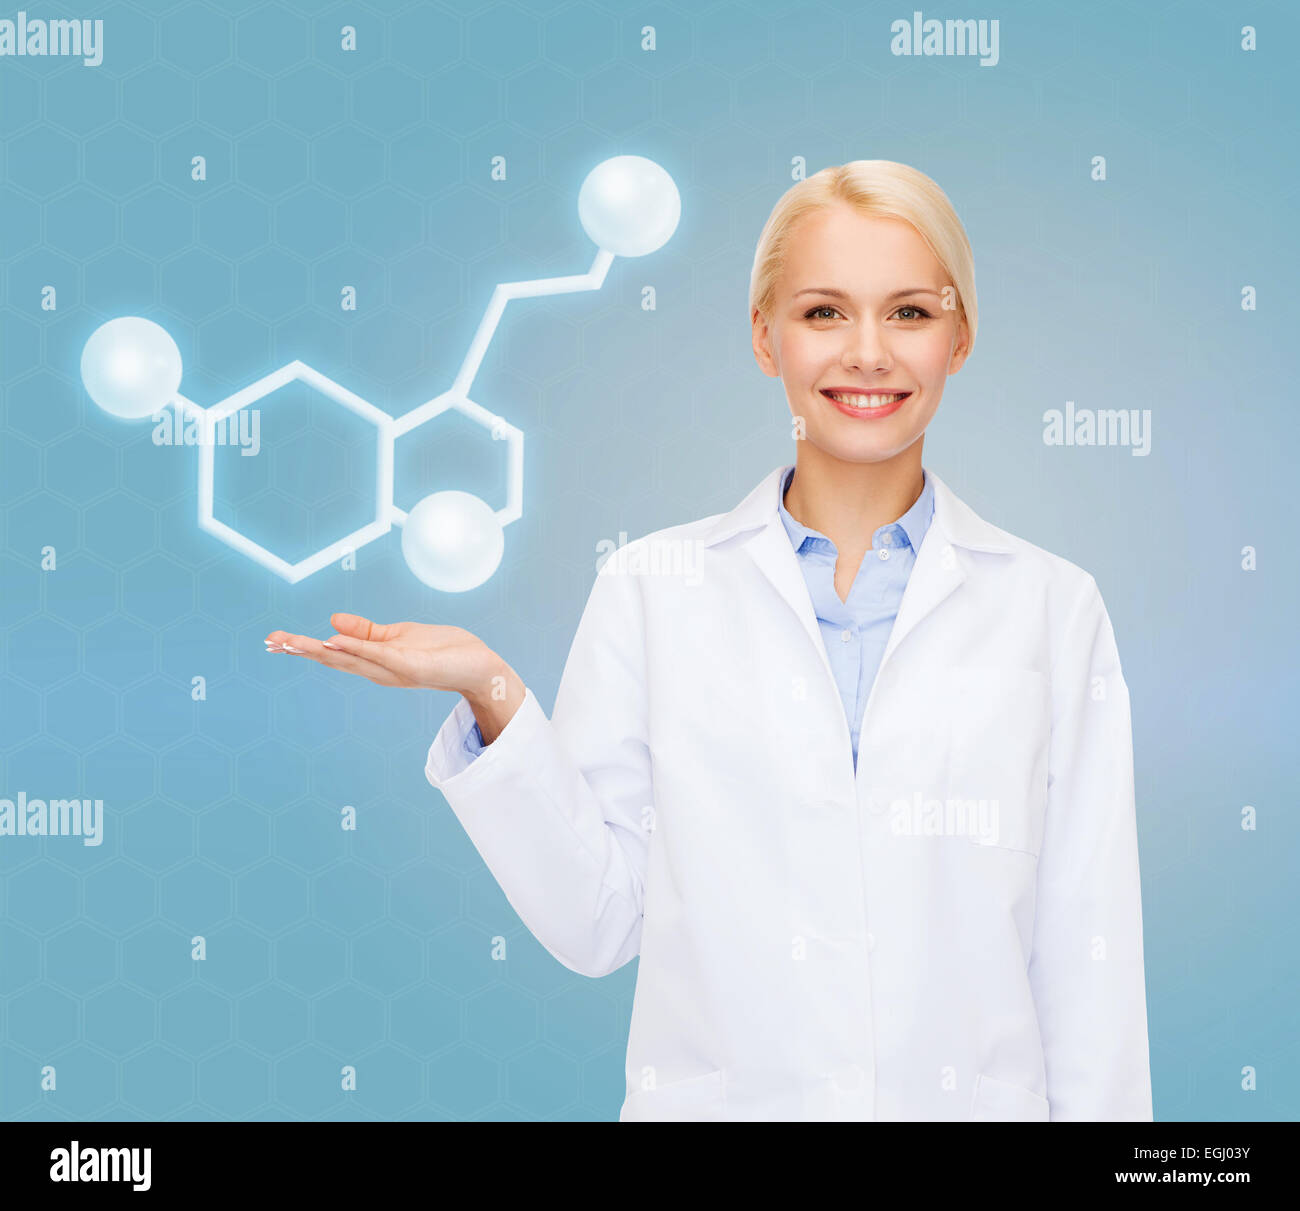 smiling female doctor pointing to molecule Stock Photo